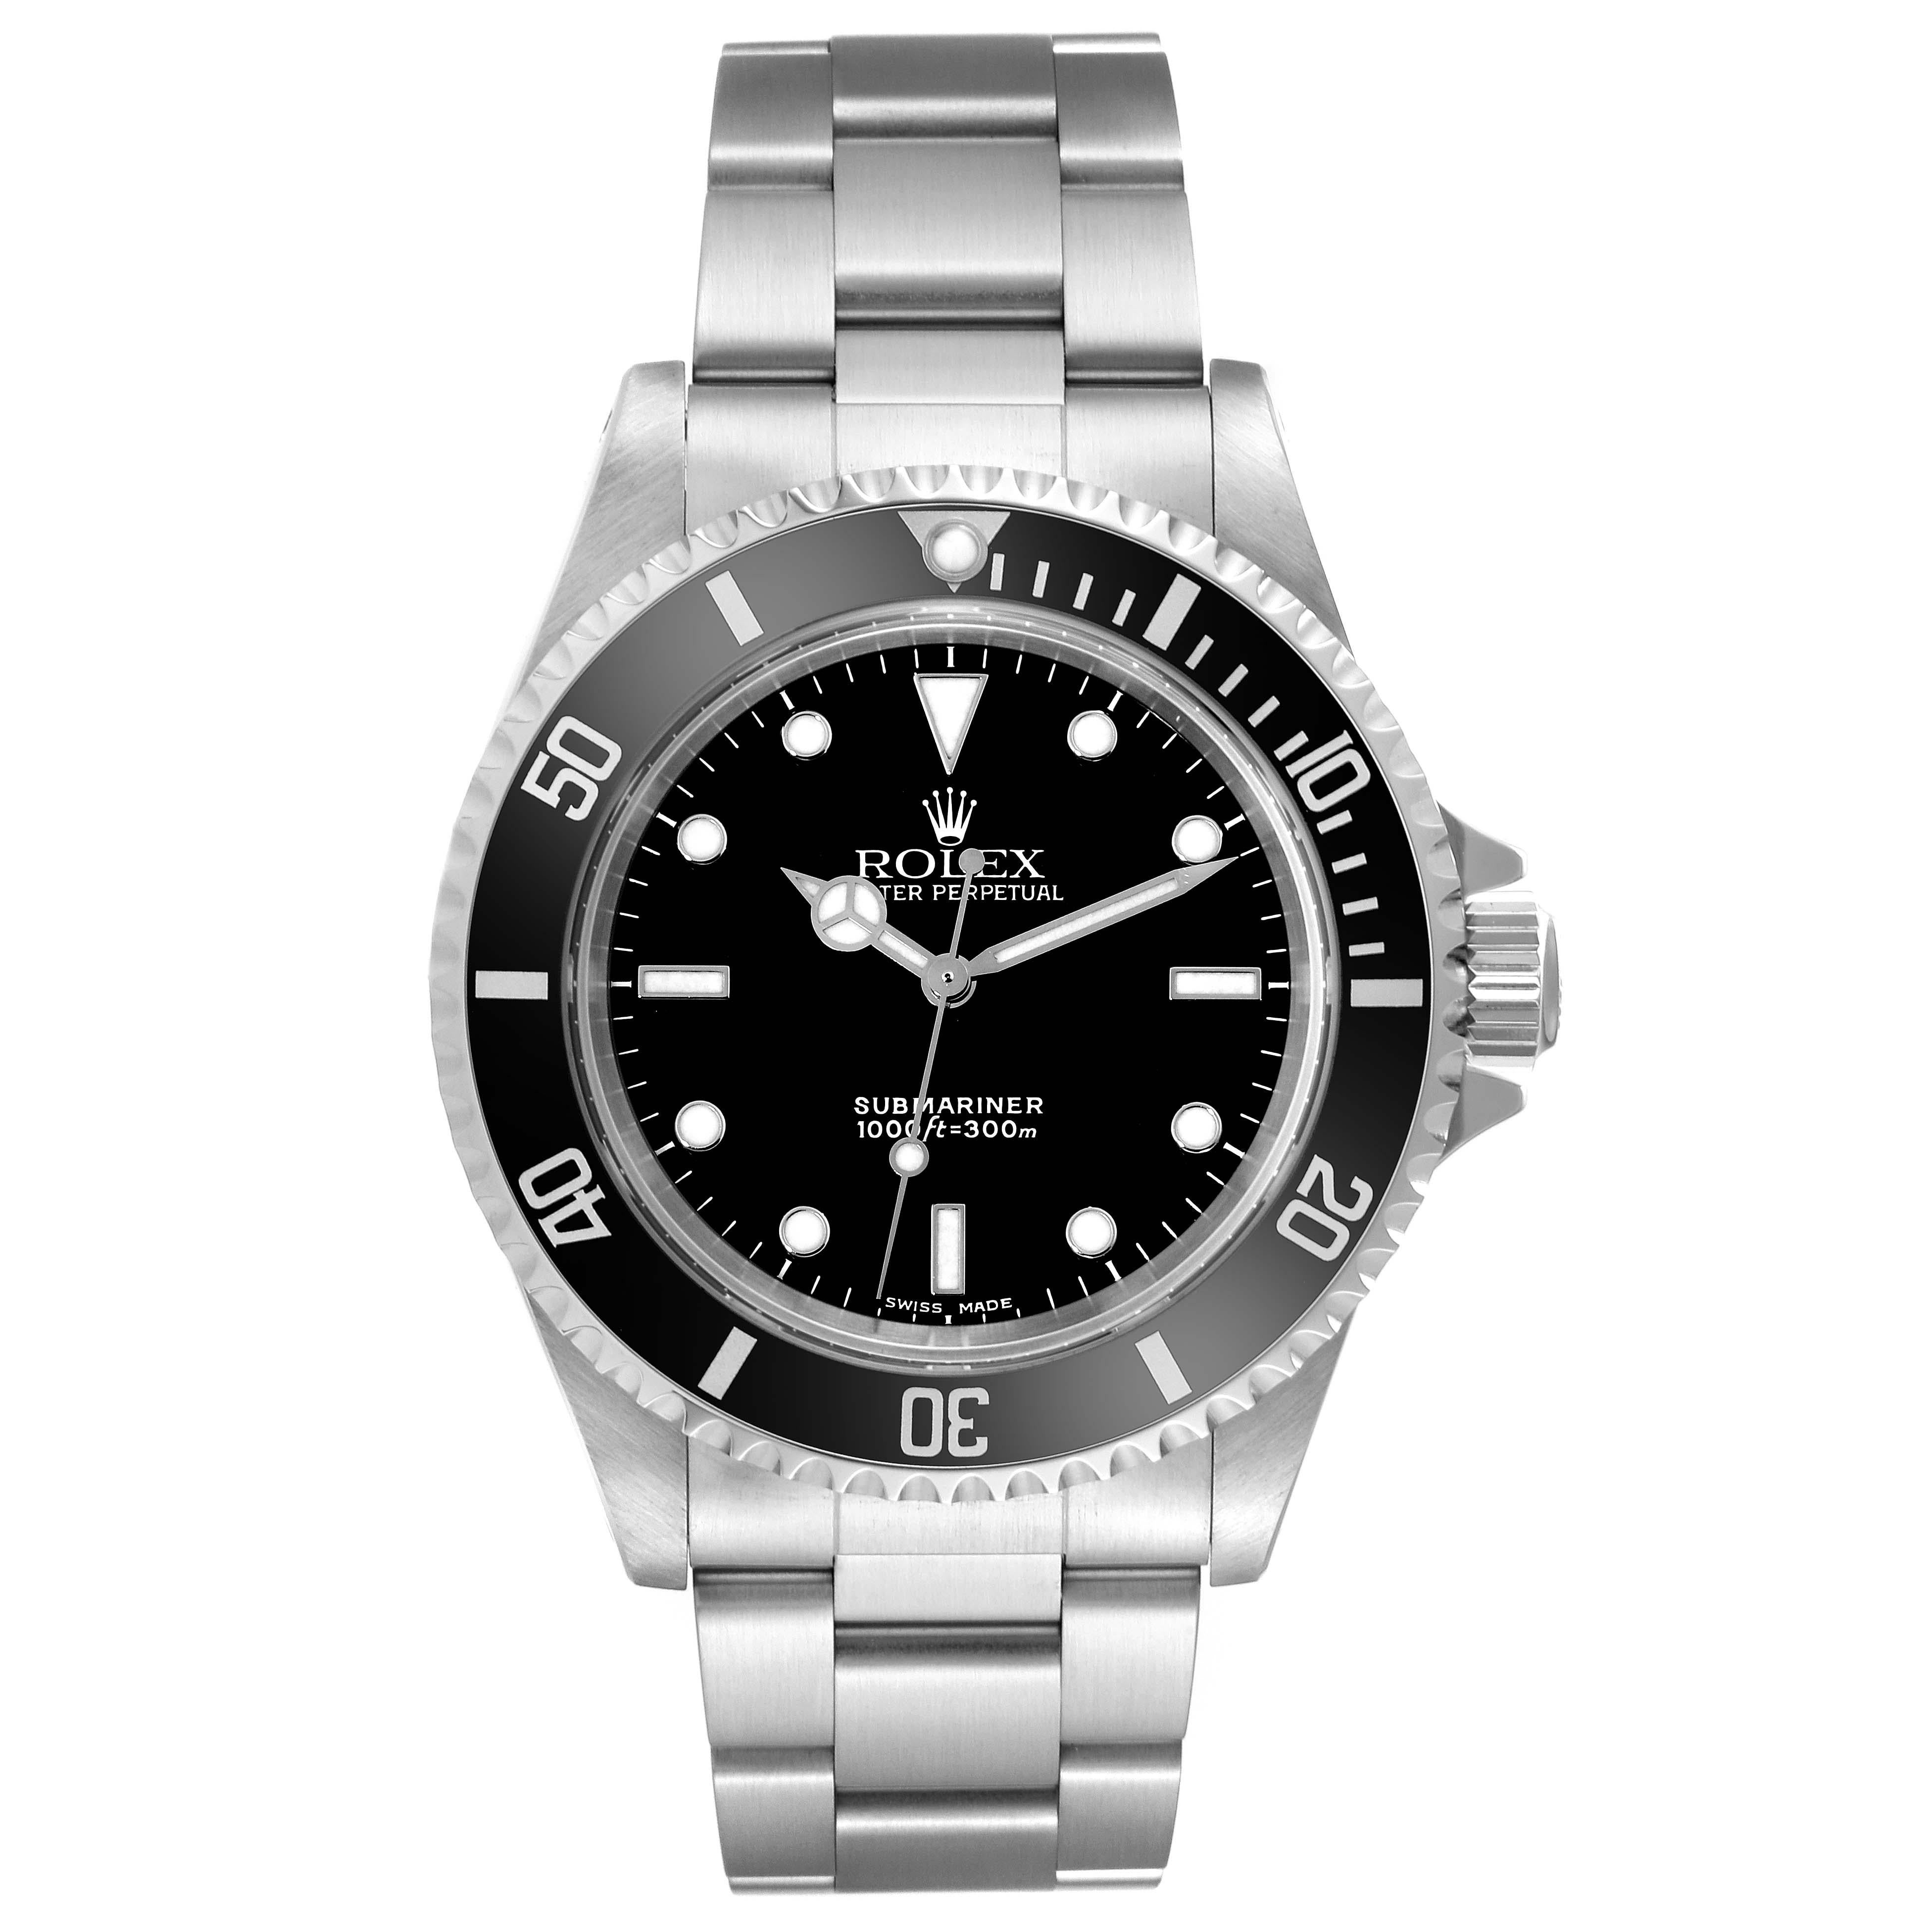 Rolex Submariner No Date 40mm 2 Liner Steel Mens Watch 14060. Officially certified chronometer automatic self-winding movement. Stainless steel case 40.0 mm in diameter. Rolex logo on the crown. Special time-lapse unidirectional rotating bezel.